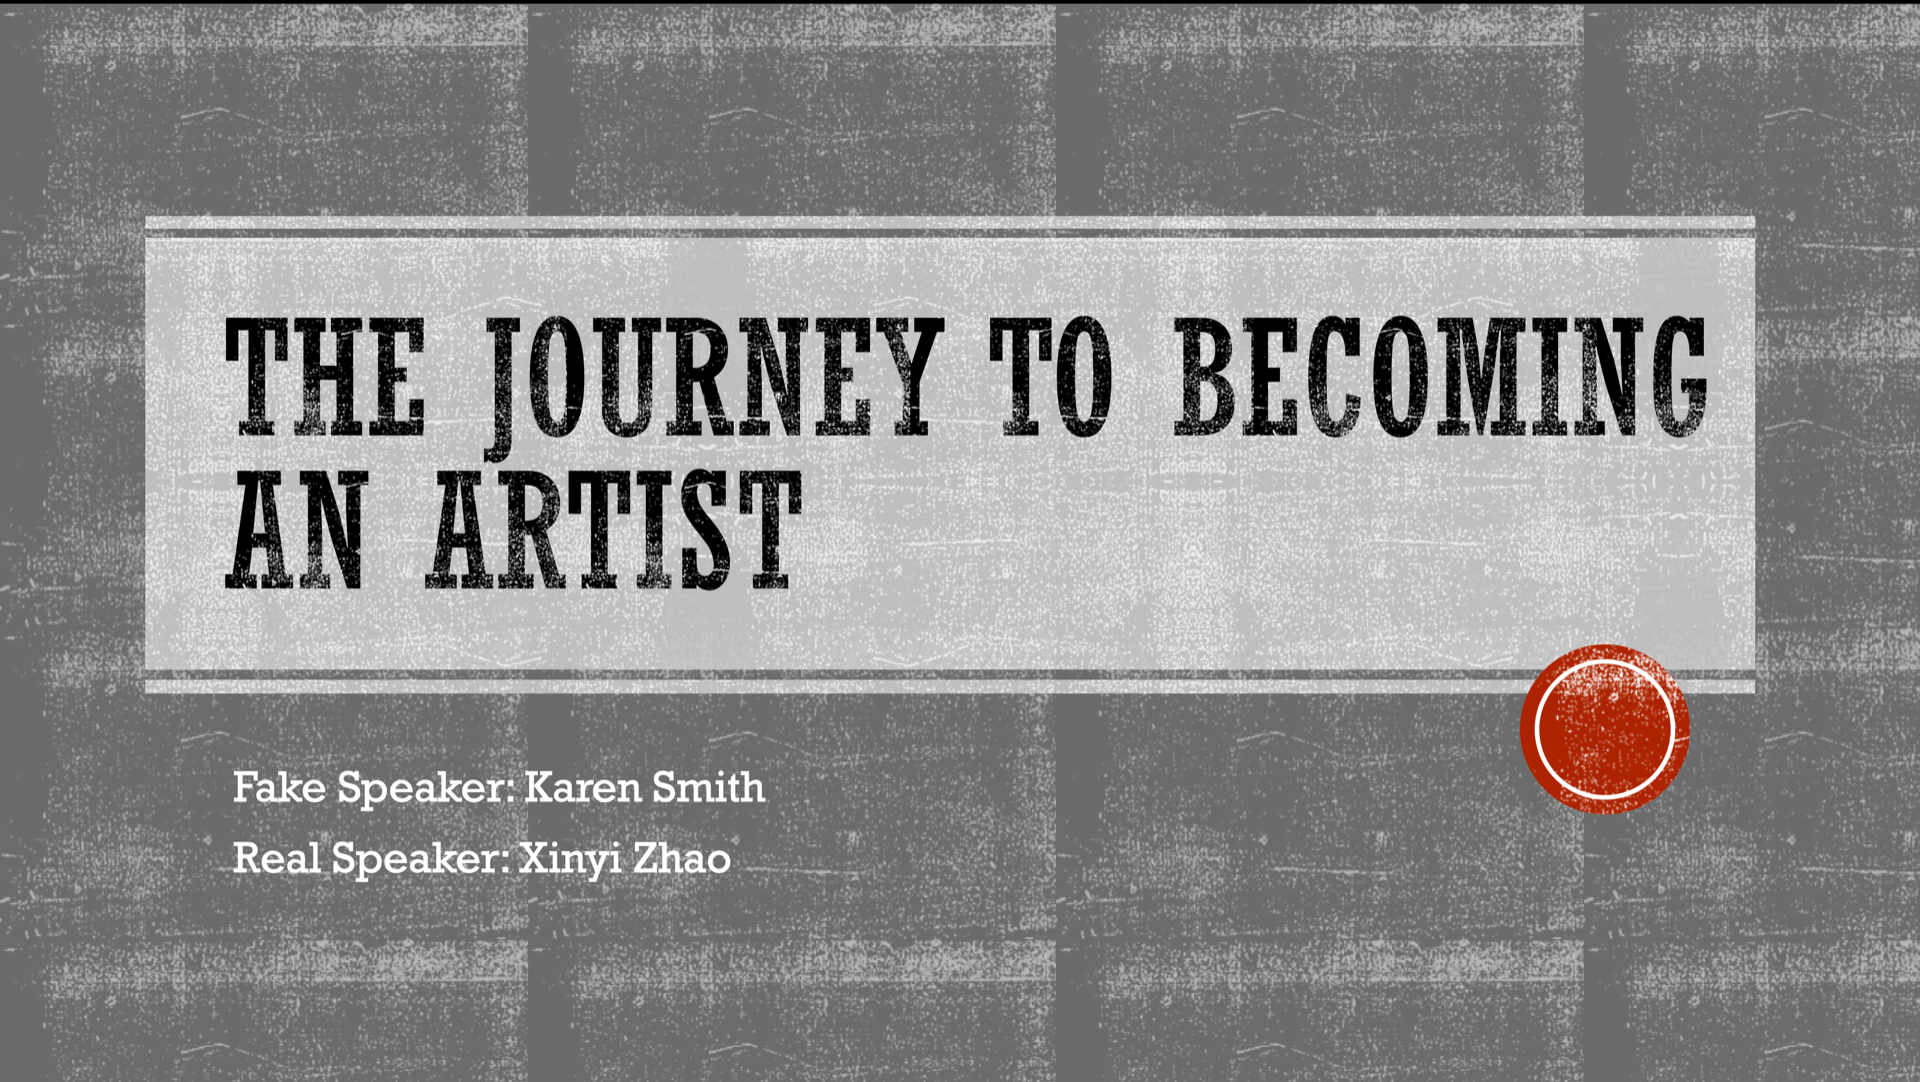 The Journey to becoming an artist